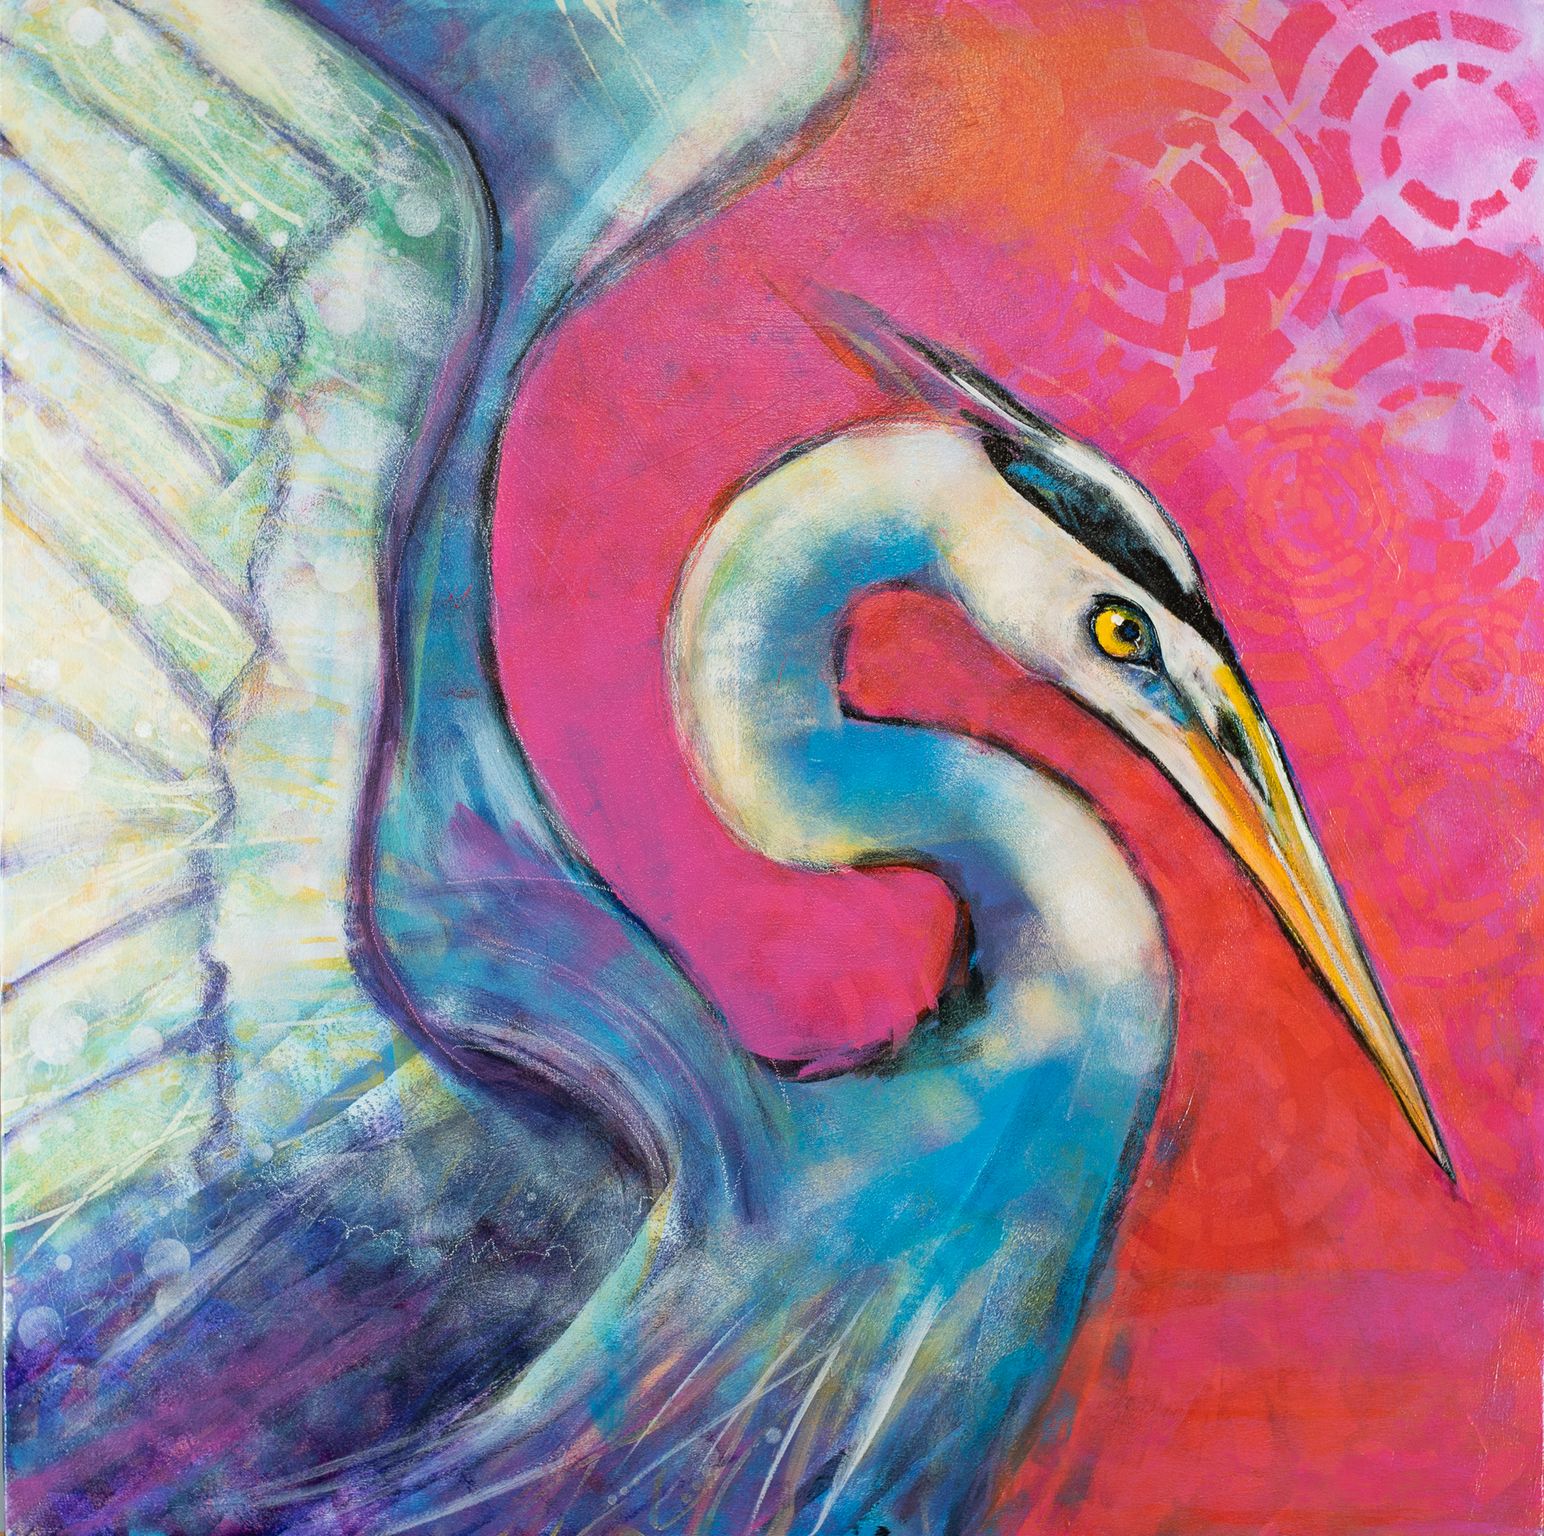 A colorful painting of a Great Blue Heron by Rosemary Conroy